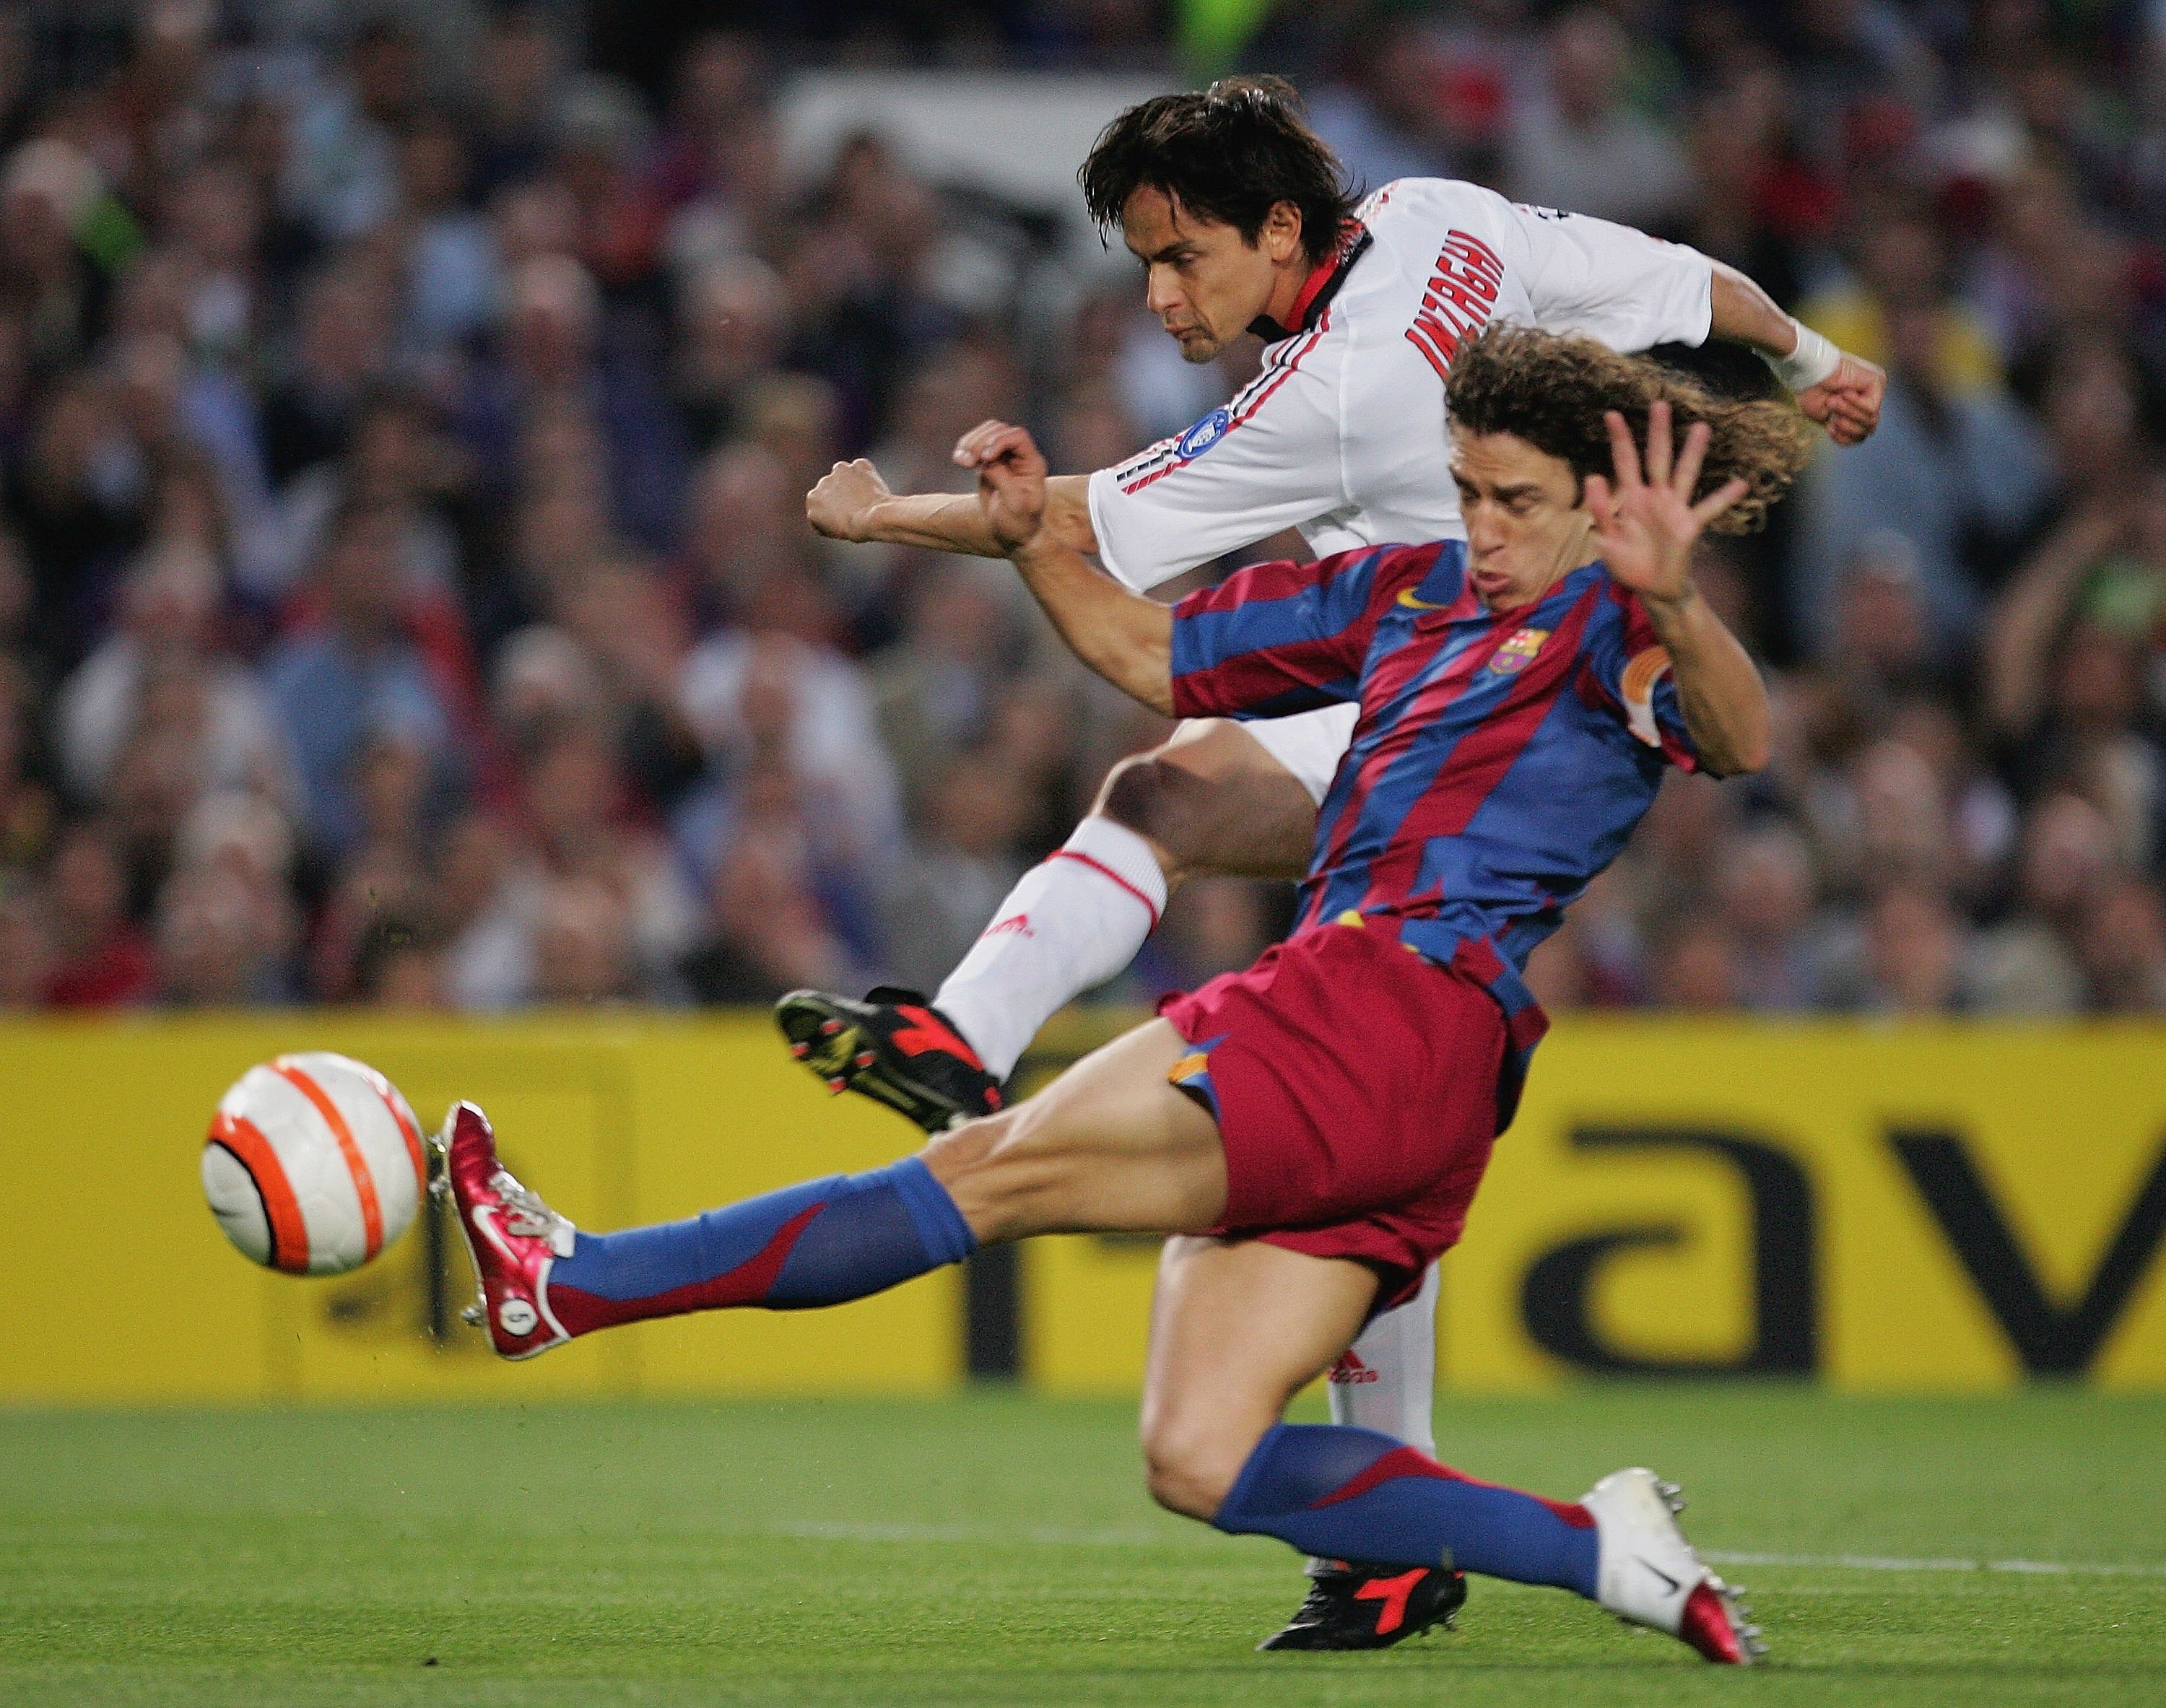 BARCELONA, SPAIN - APRIL 26: Filippo Inzaghi of AC Miland shoots under pressure from Carles Puyol of Barcelona during the UEFA Champions League Semi Final match between Barcelona and AC Milan at the Camp Nou on April 26, 2006 in Barcelona, Spain.   (Photo